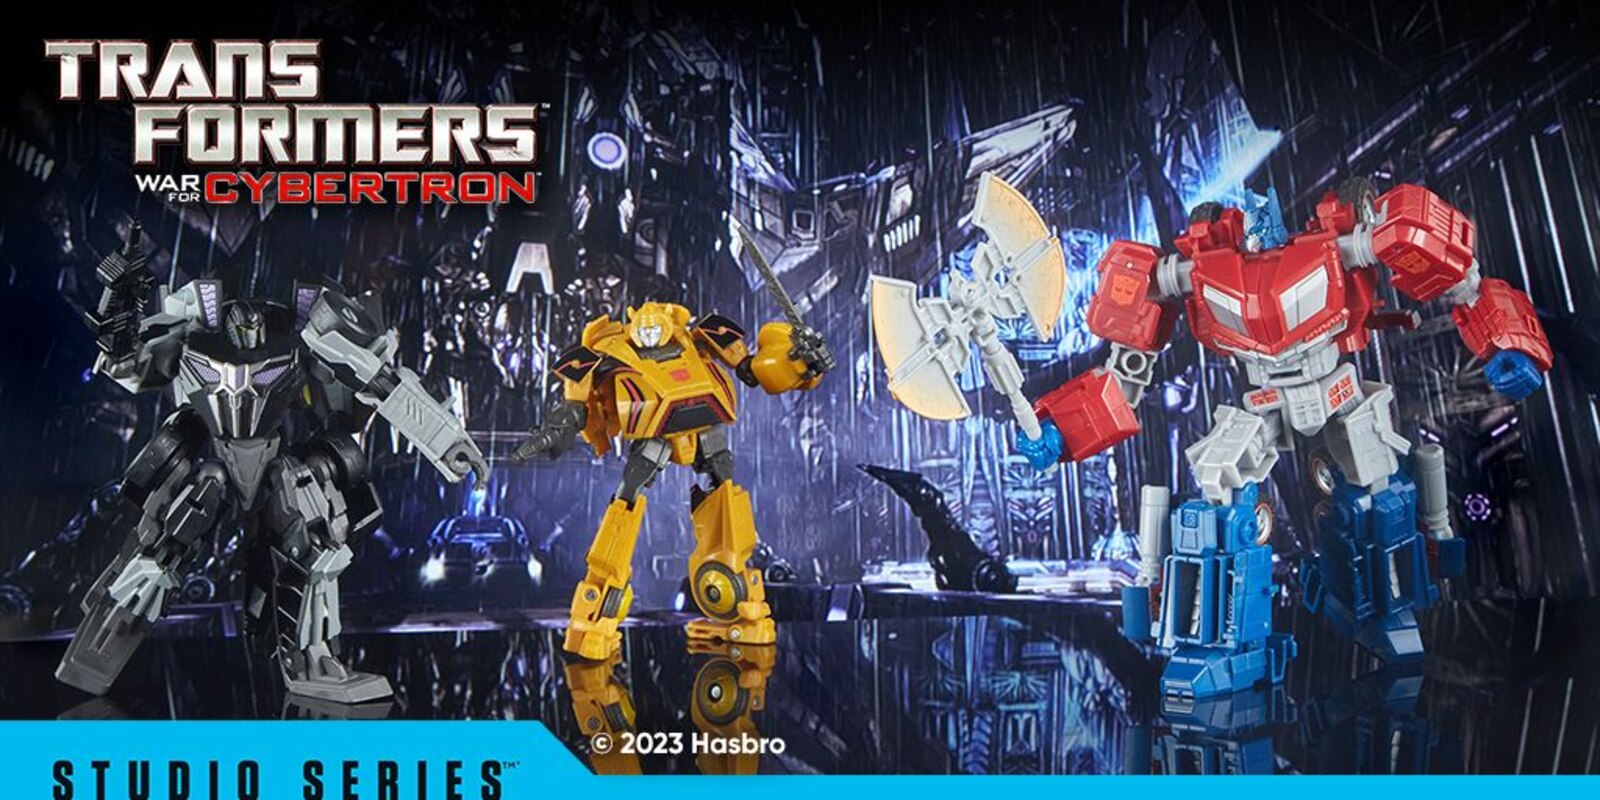 Nothing like seeing prime an ultra magnus and bumblebee in my